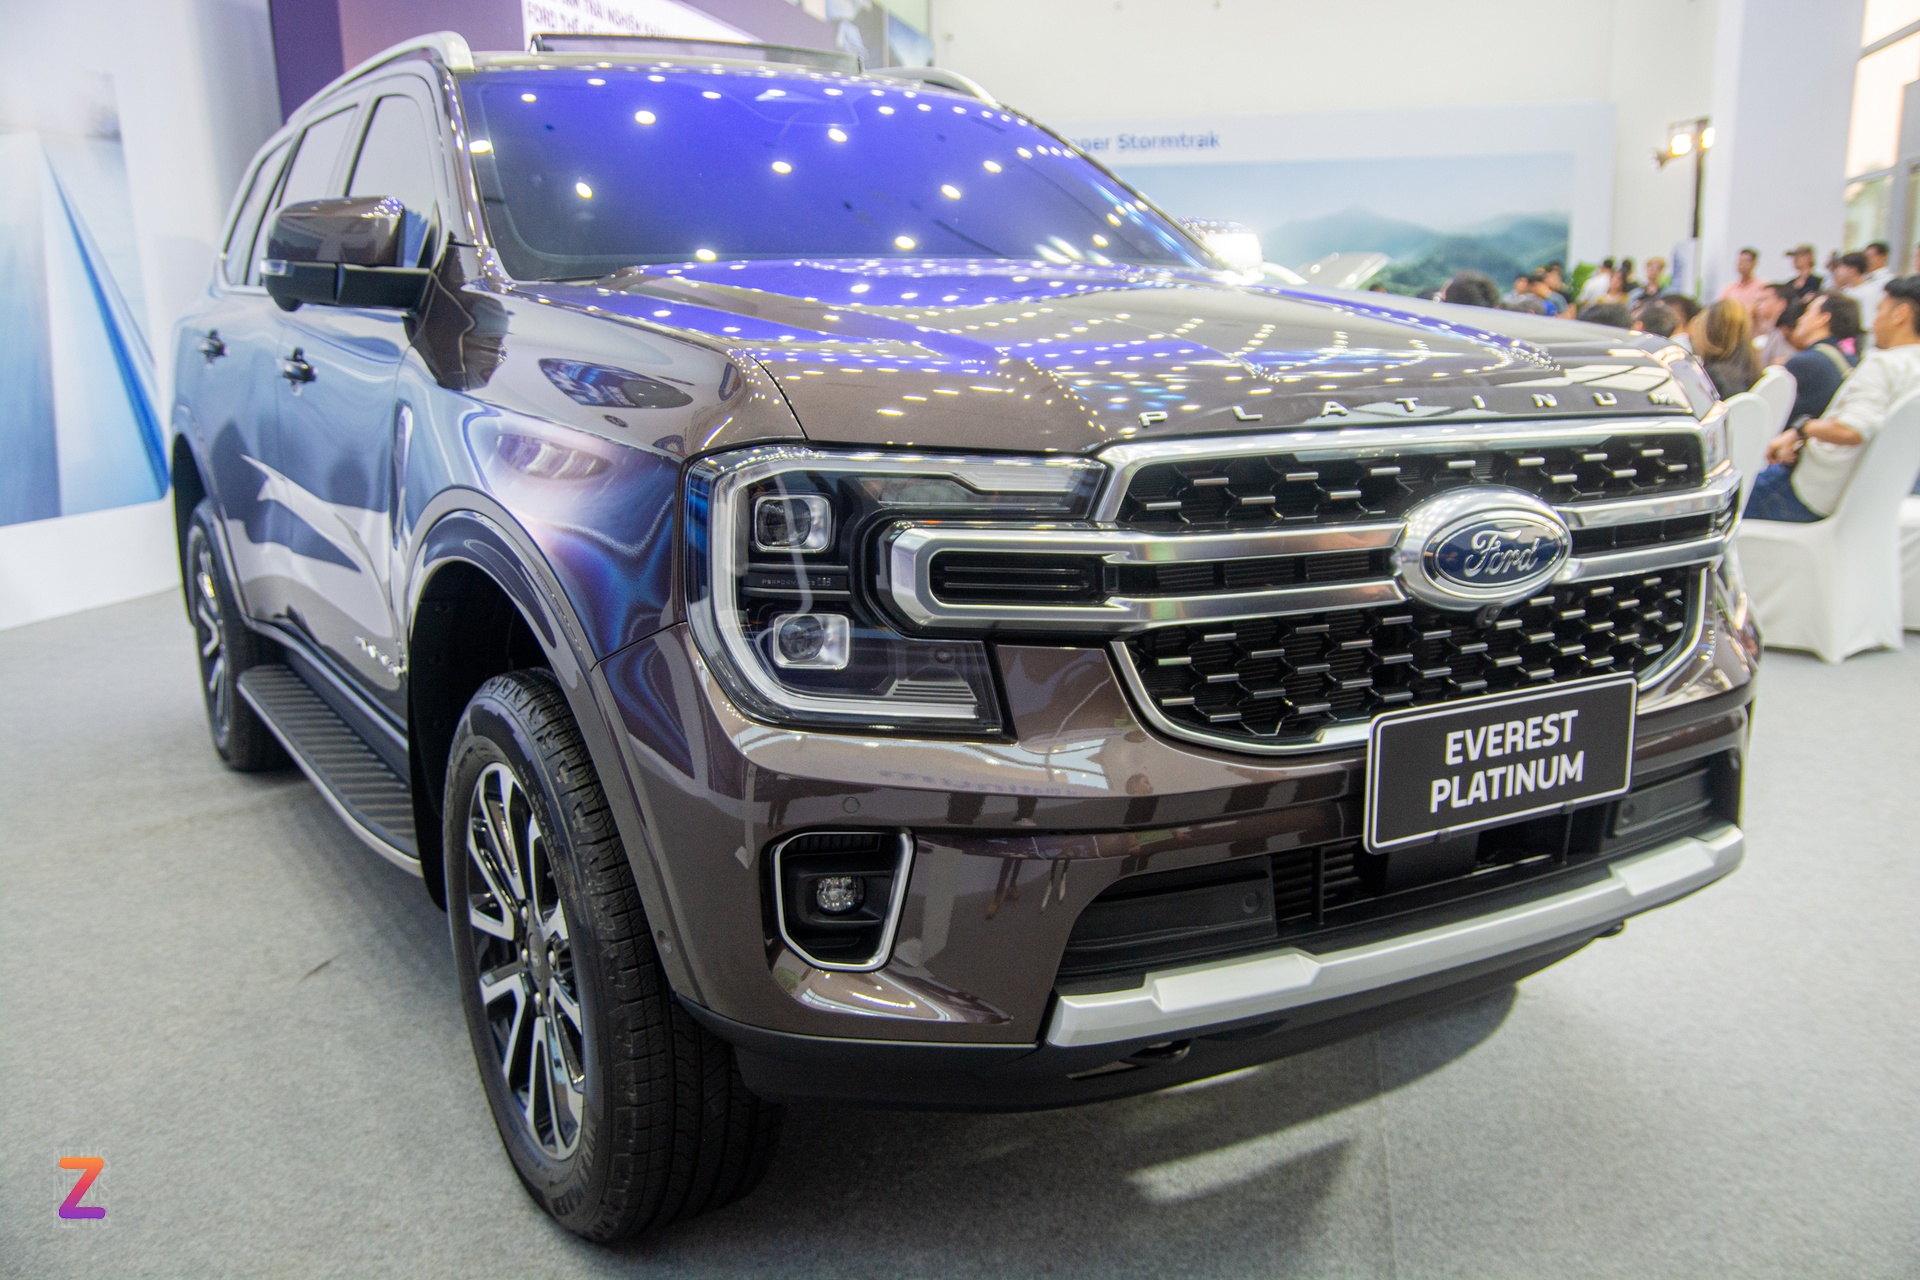 Ford Everest Platinum mo ban anh 2